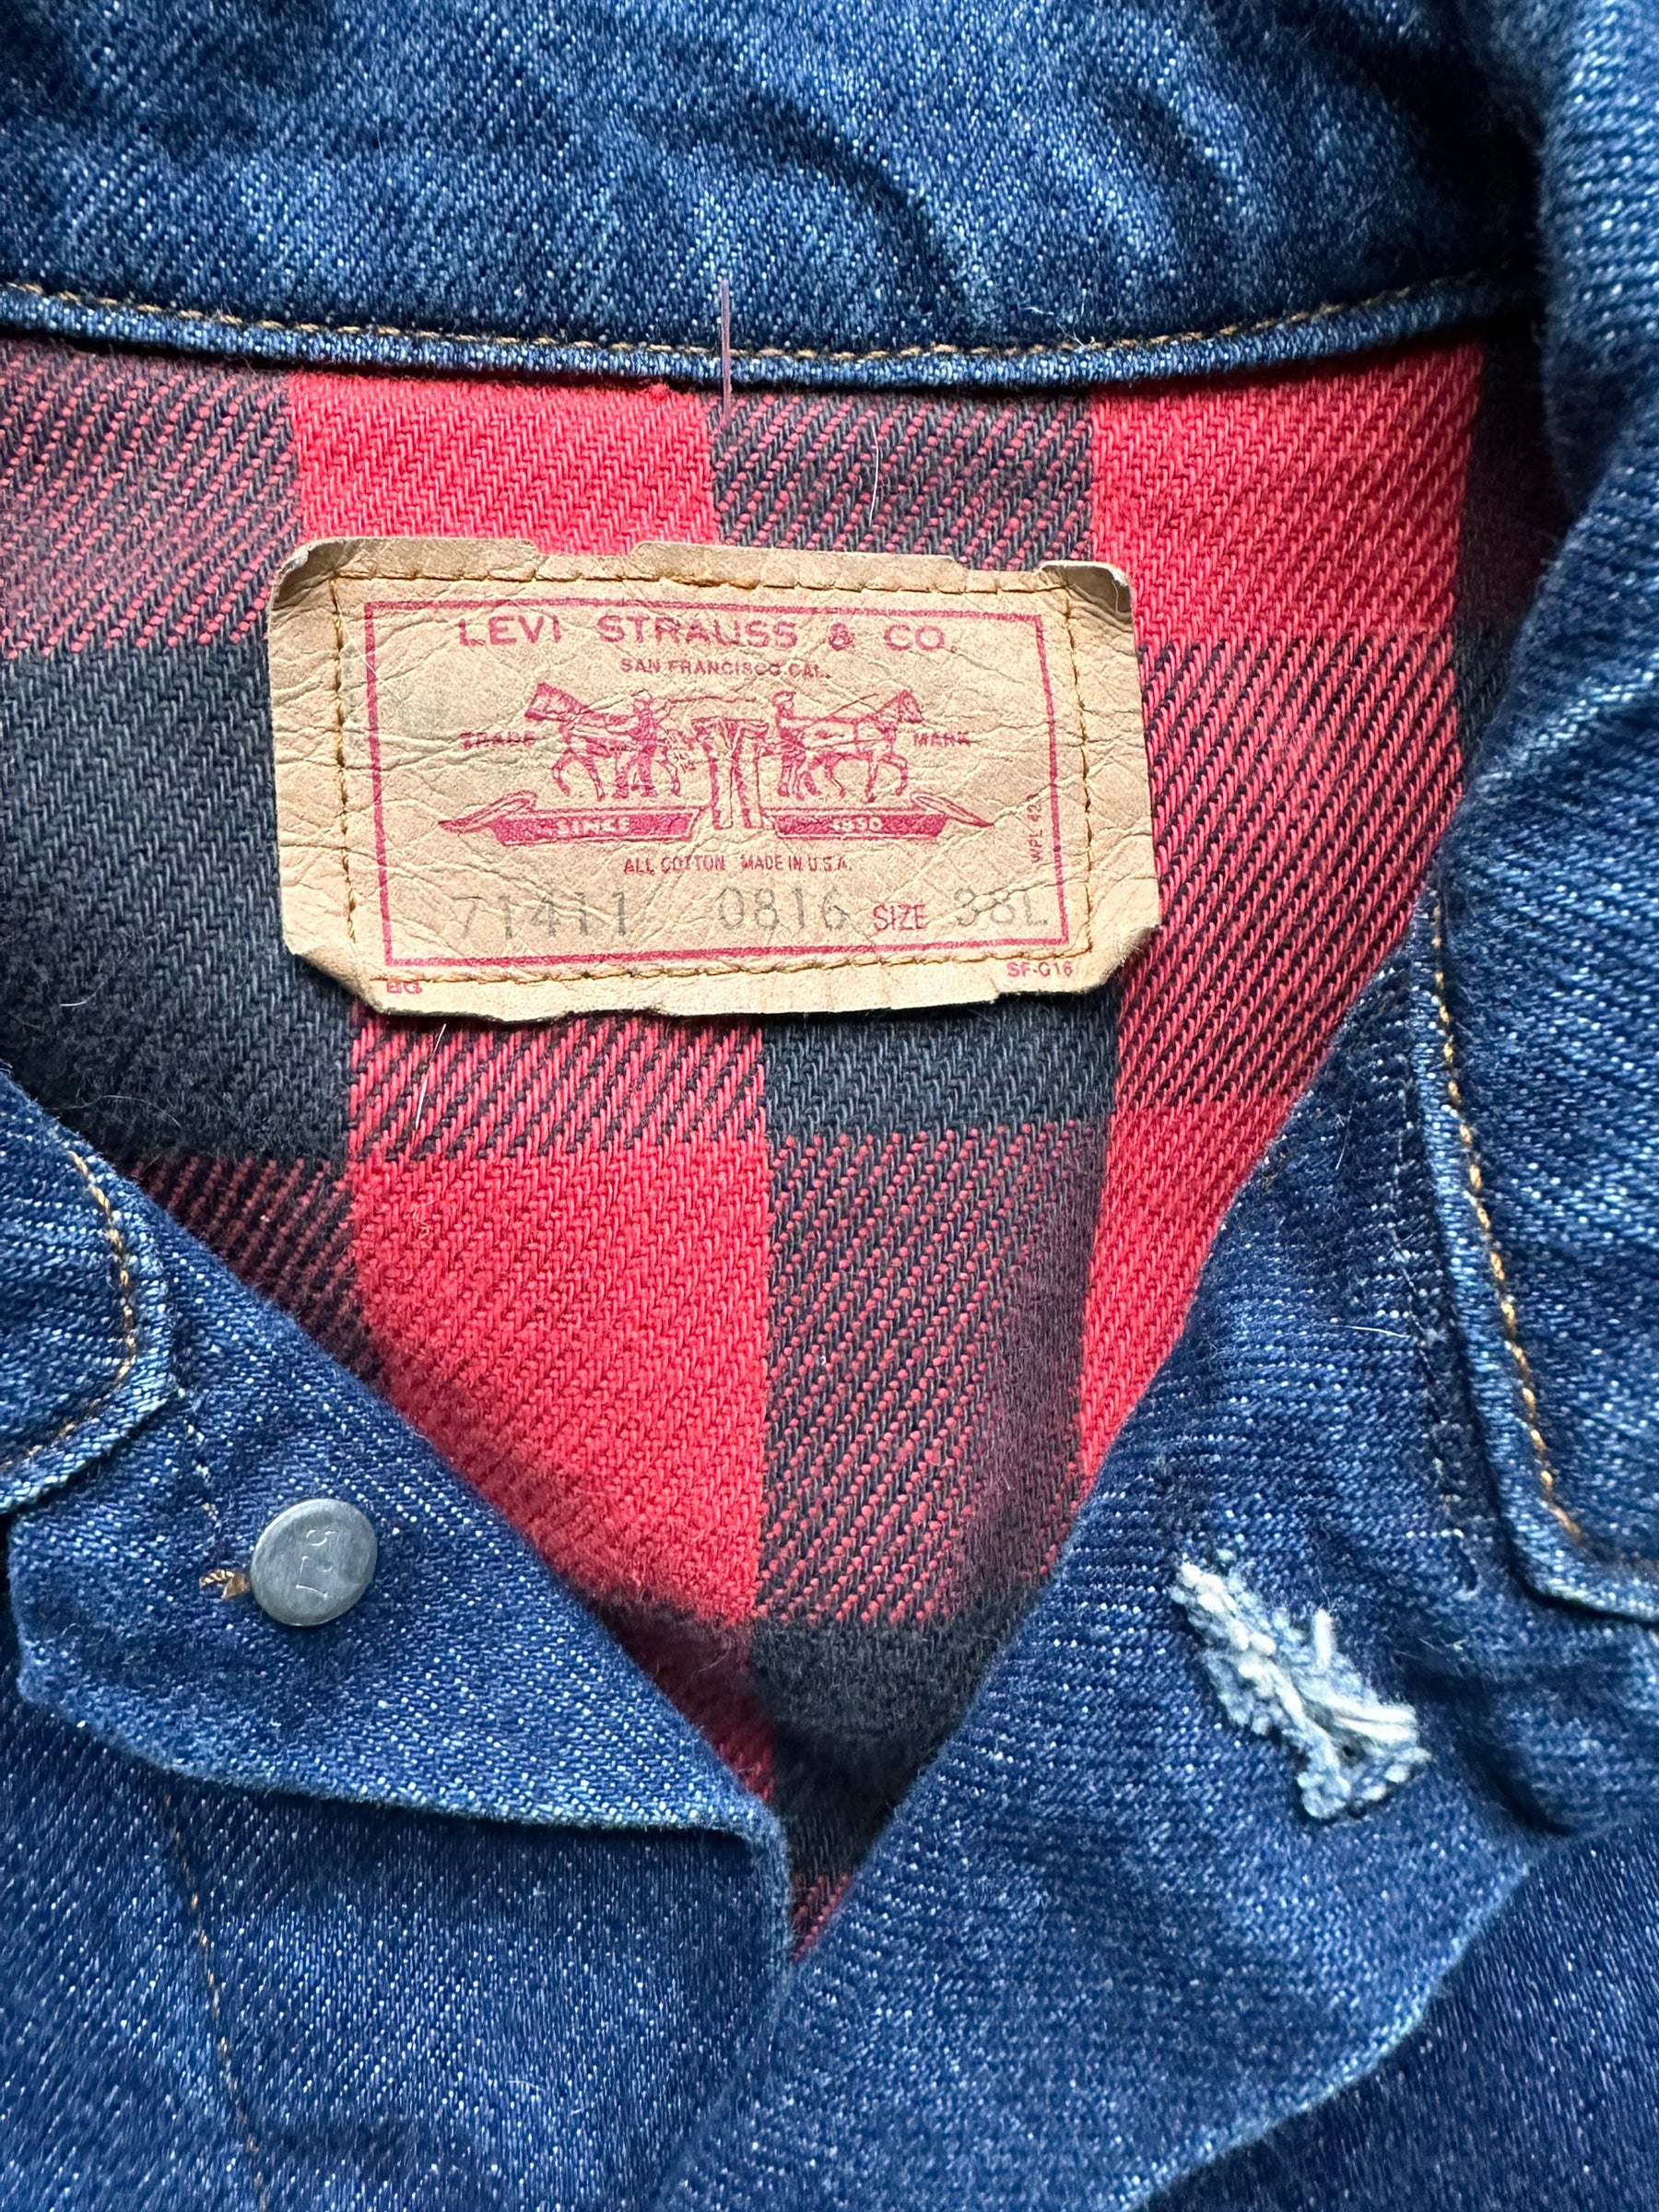 Glory Days vintage Levis jacket with vintage Ralph Lauren plaid flannel  lining | RE.STATEMENT | The Upcycled Fashion Marketplace